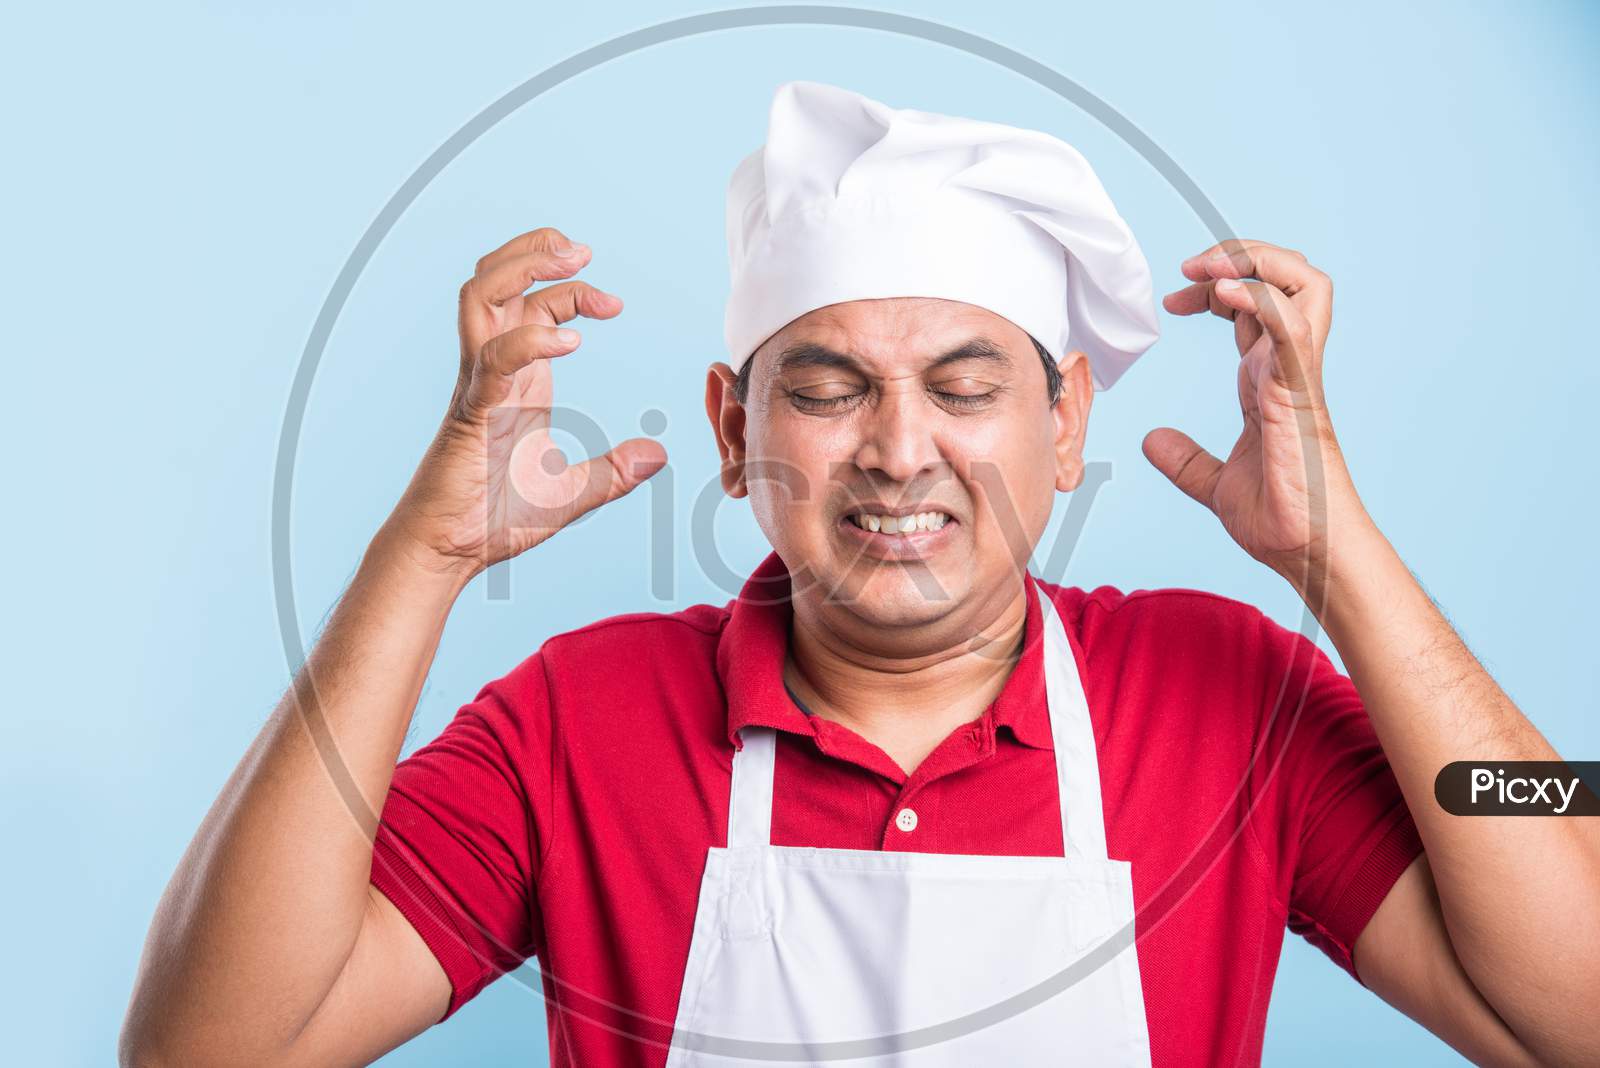 Image Of Indian Male Chef Cook In Apron And Wearing Hat Fq355444 Picxy 